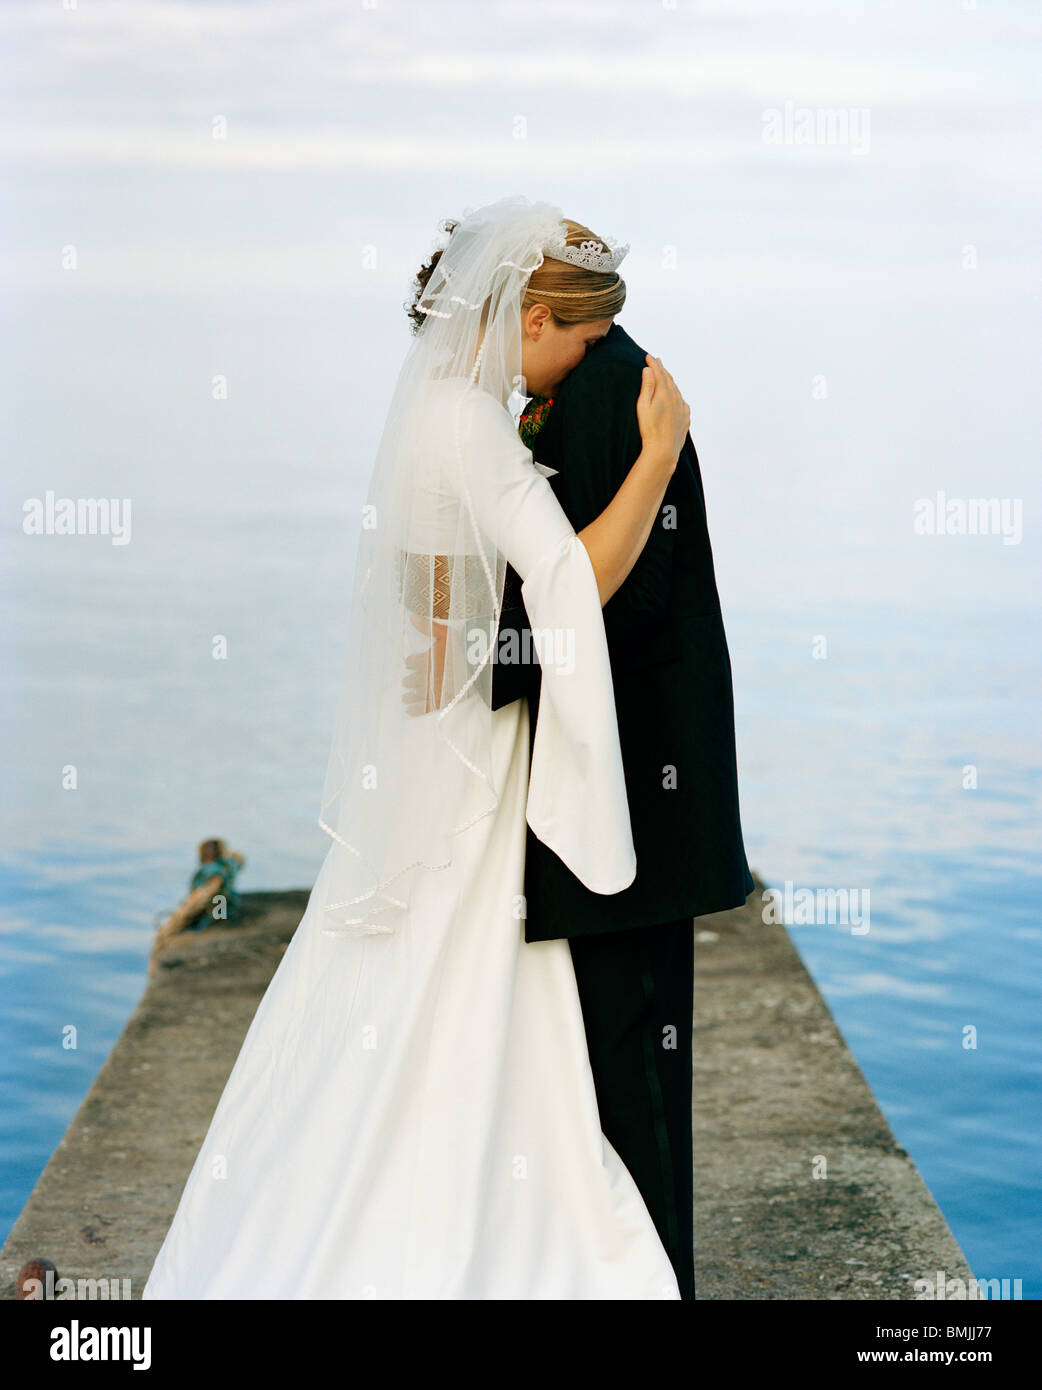 Scandinavia, Sweden, Oland, Groom and bride embracing on jetty Stock Photo